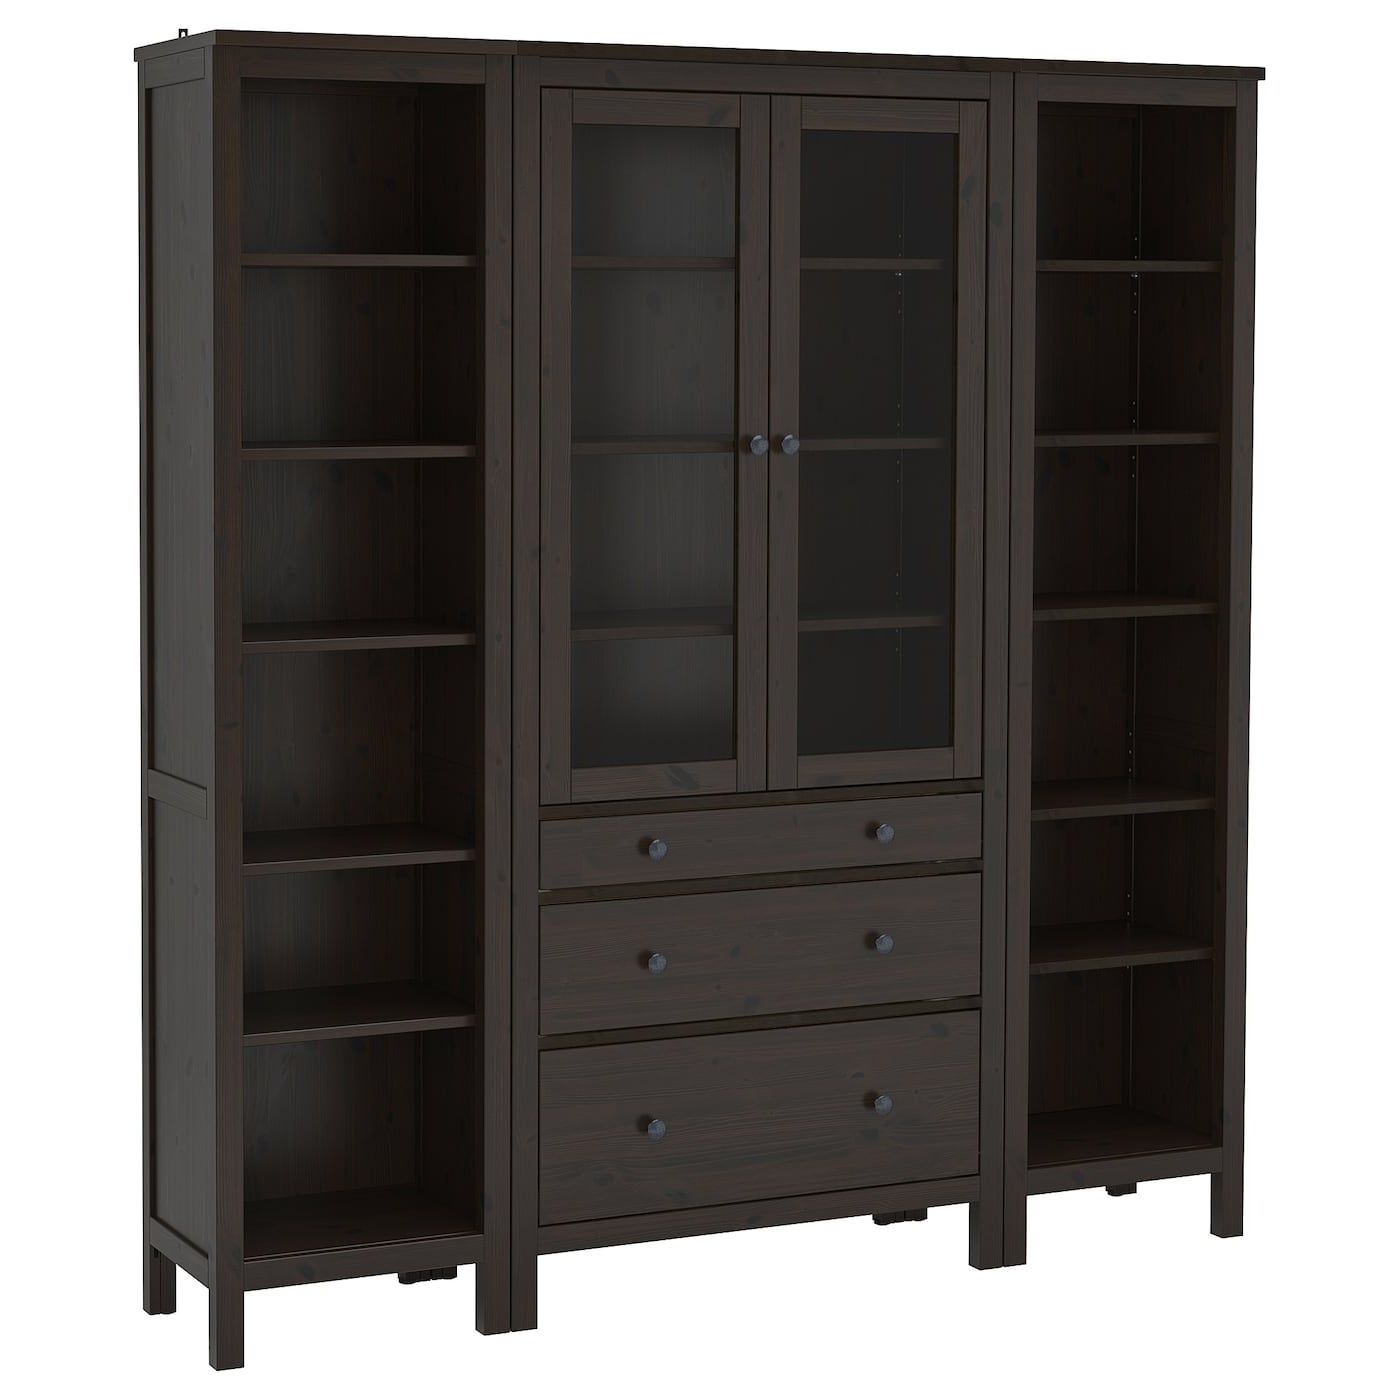 Hemnes Storage Combination W Doors/drawers, Black Brown Within Dark Brown Tv Cabinets With 2 Sliding Doors And Drawer (View 17 of 20)